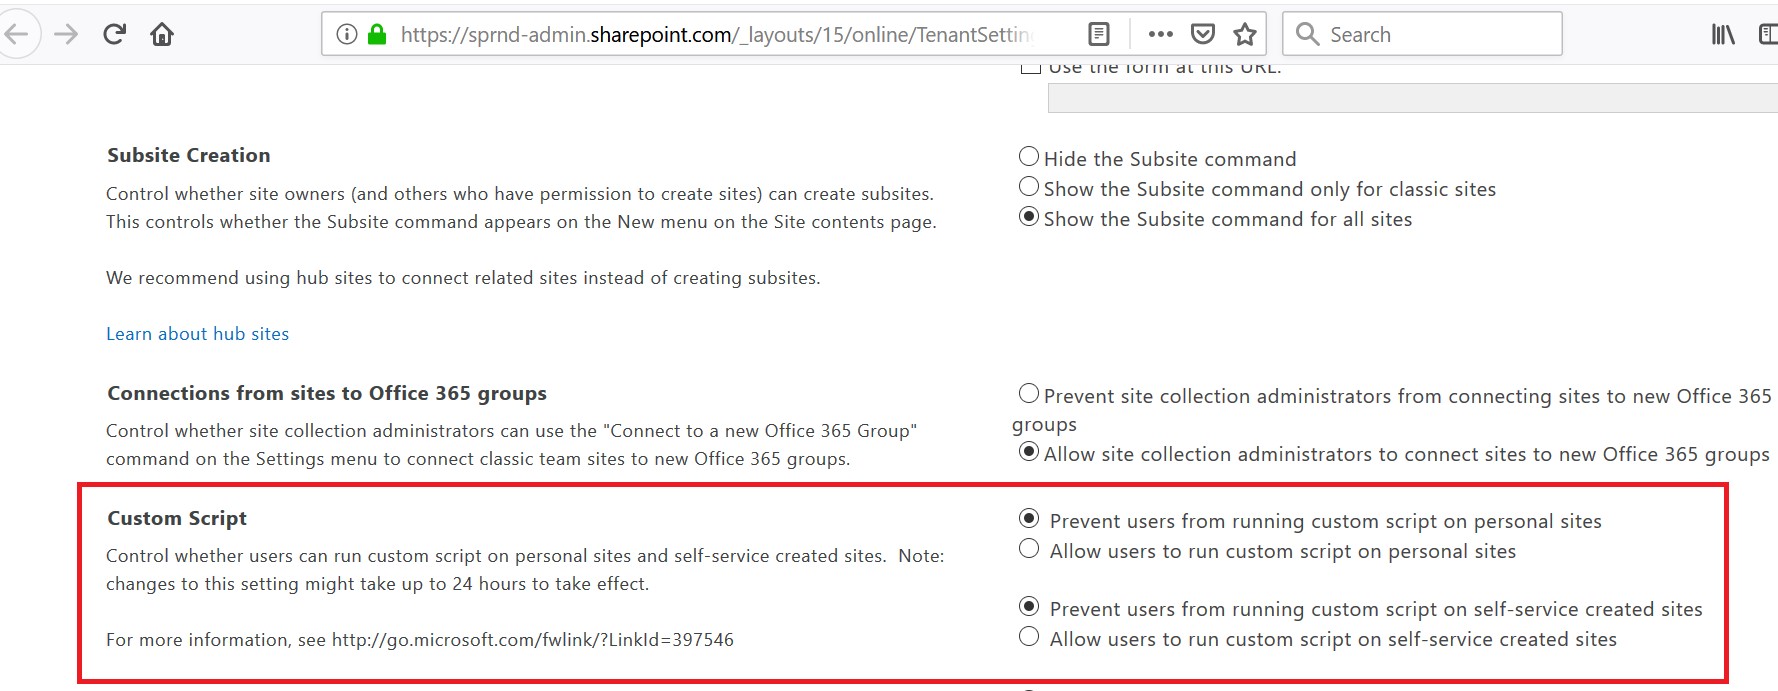 Open aspx file Online, Prevent users from running custom script on personal sites in SharePoint Online